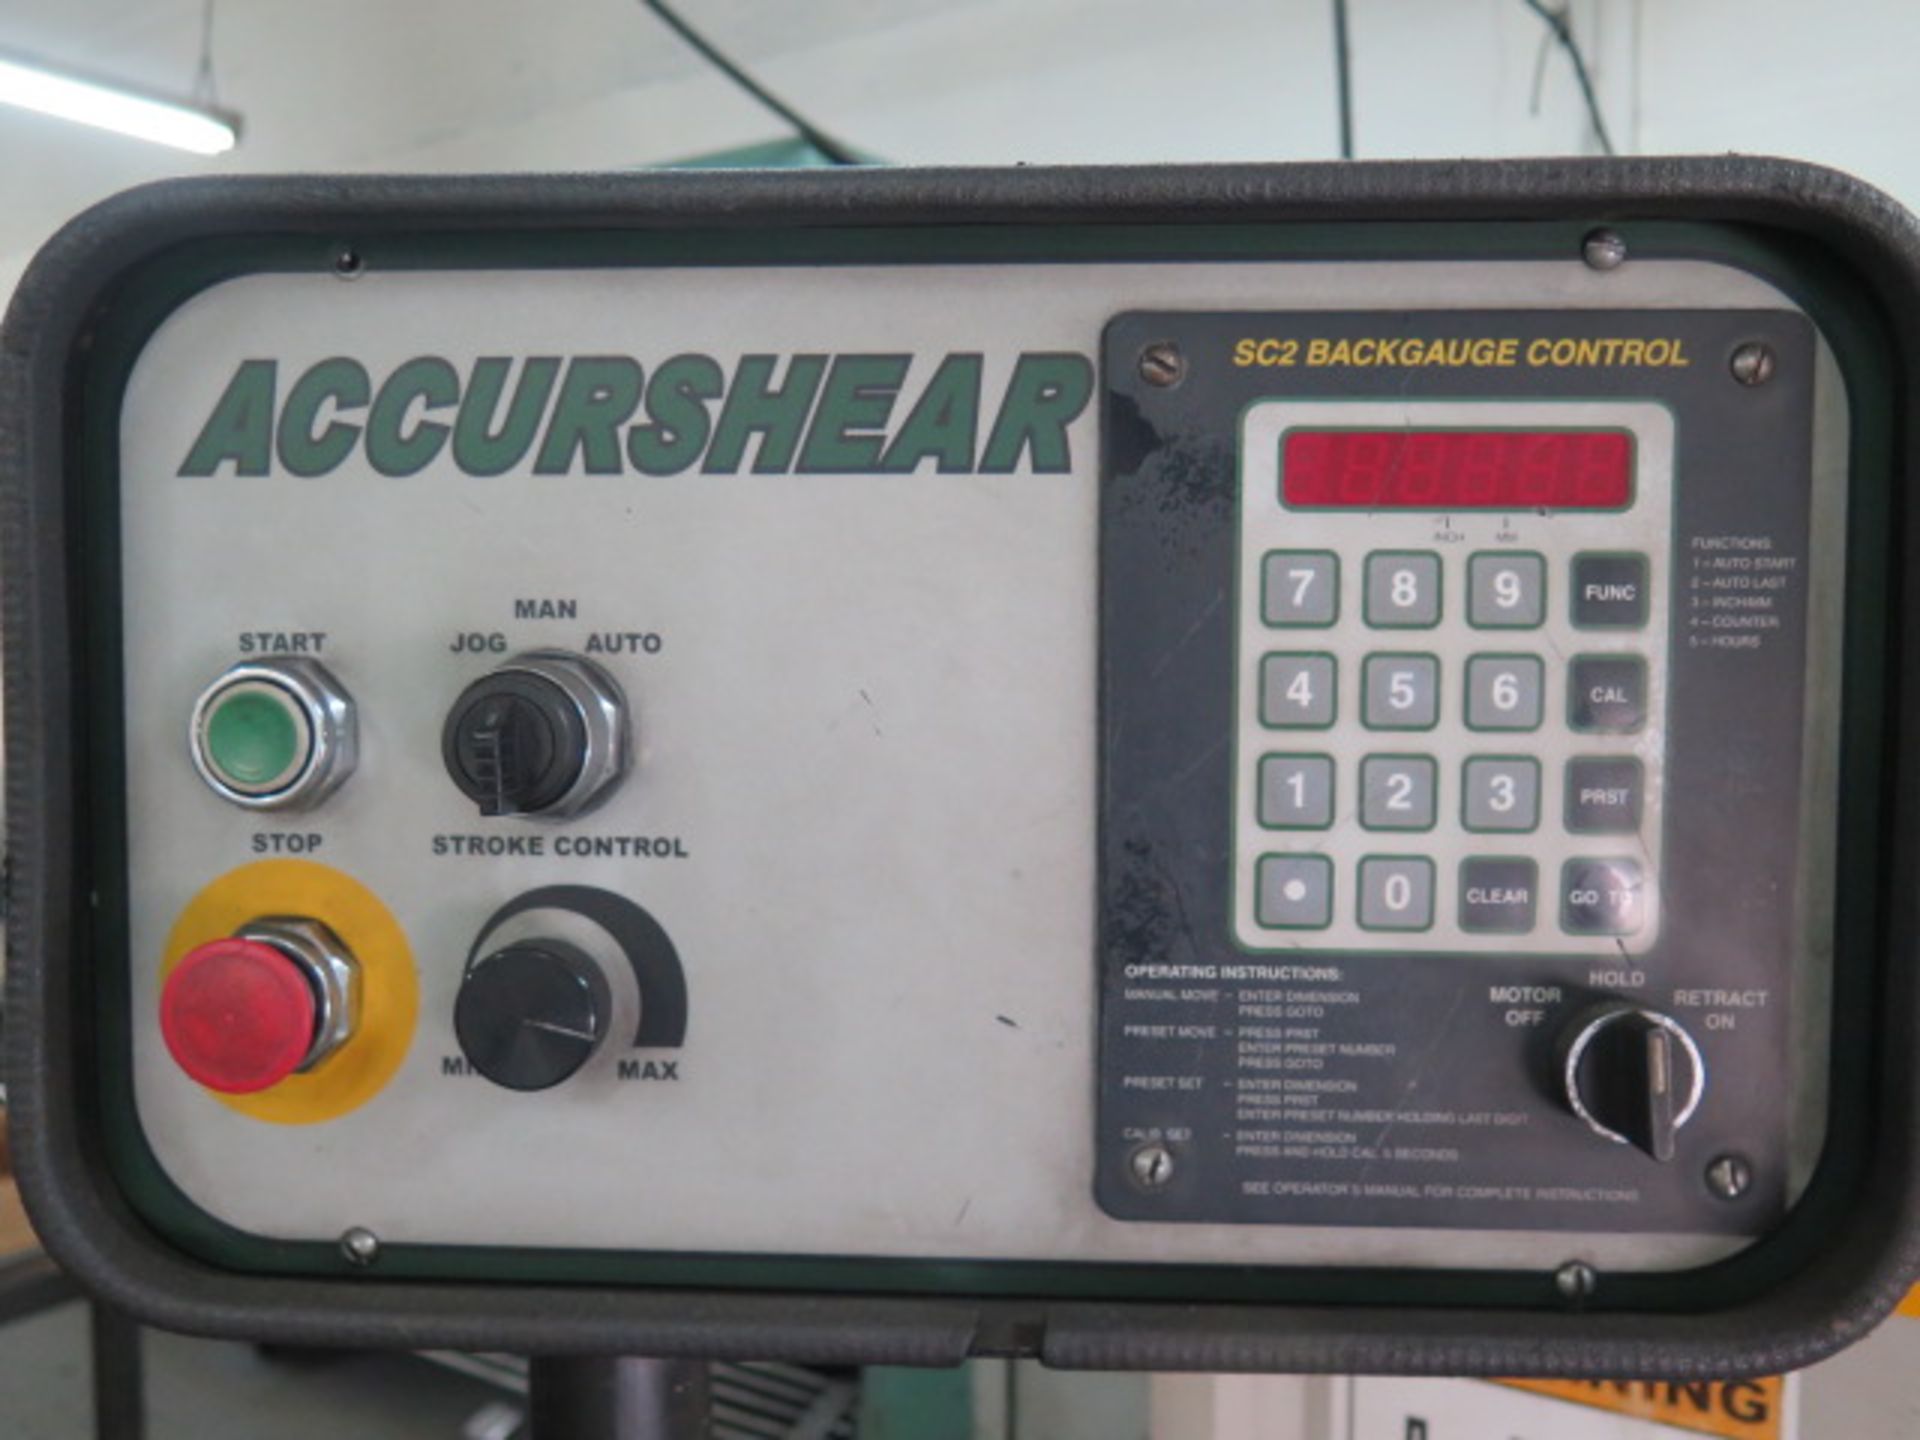 1999 Accurshear 625010 ¼” x 10’ Hyd Power Shear s/n 3276 w/ Accurshear SC2 Back Gauging, SOLD AS IS - Image 4 of 14